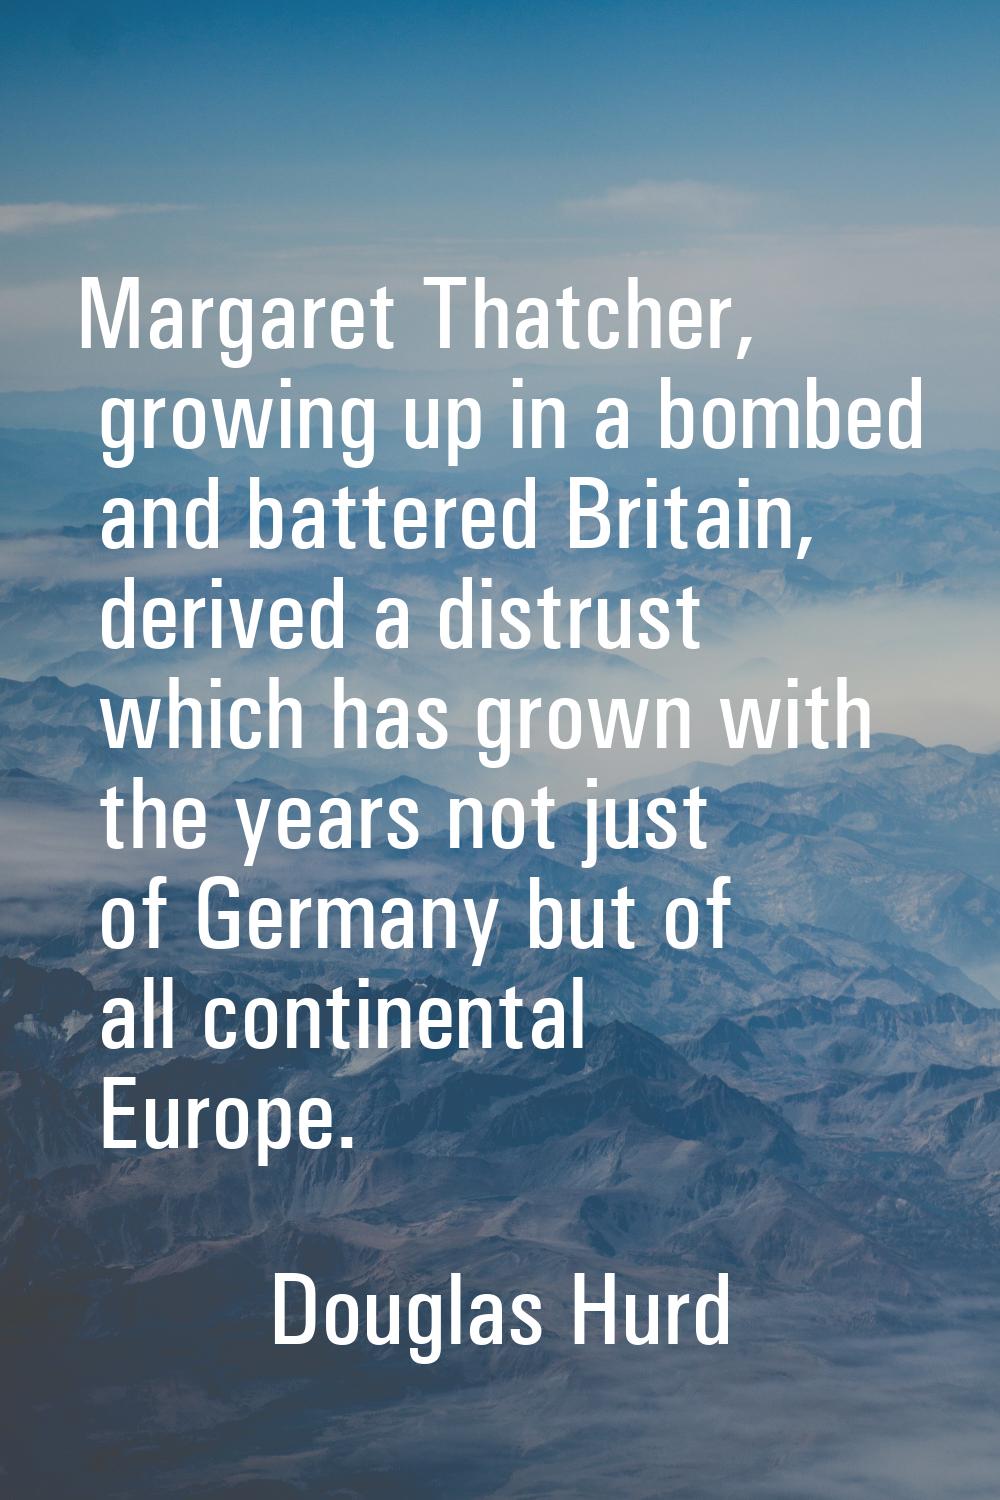 Margaret Thatcher, growing up in a bombed and battered Britain, derived a distrust which has grown 